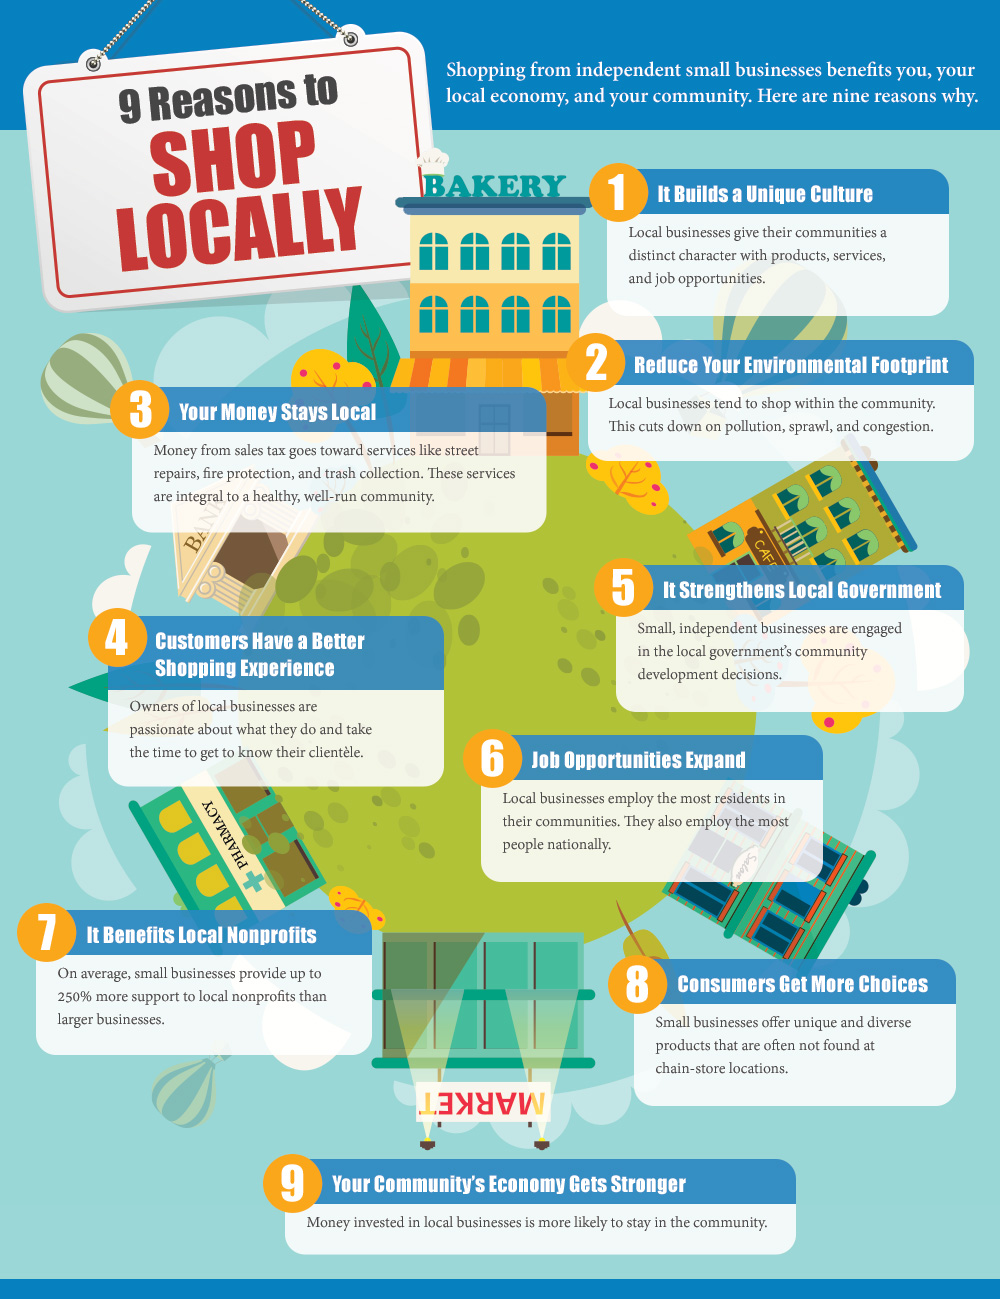 RL_Infographic_ShopLocal_5-16